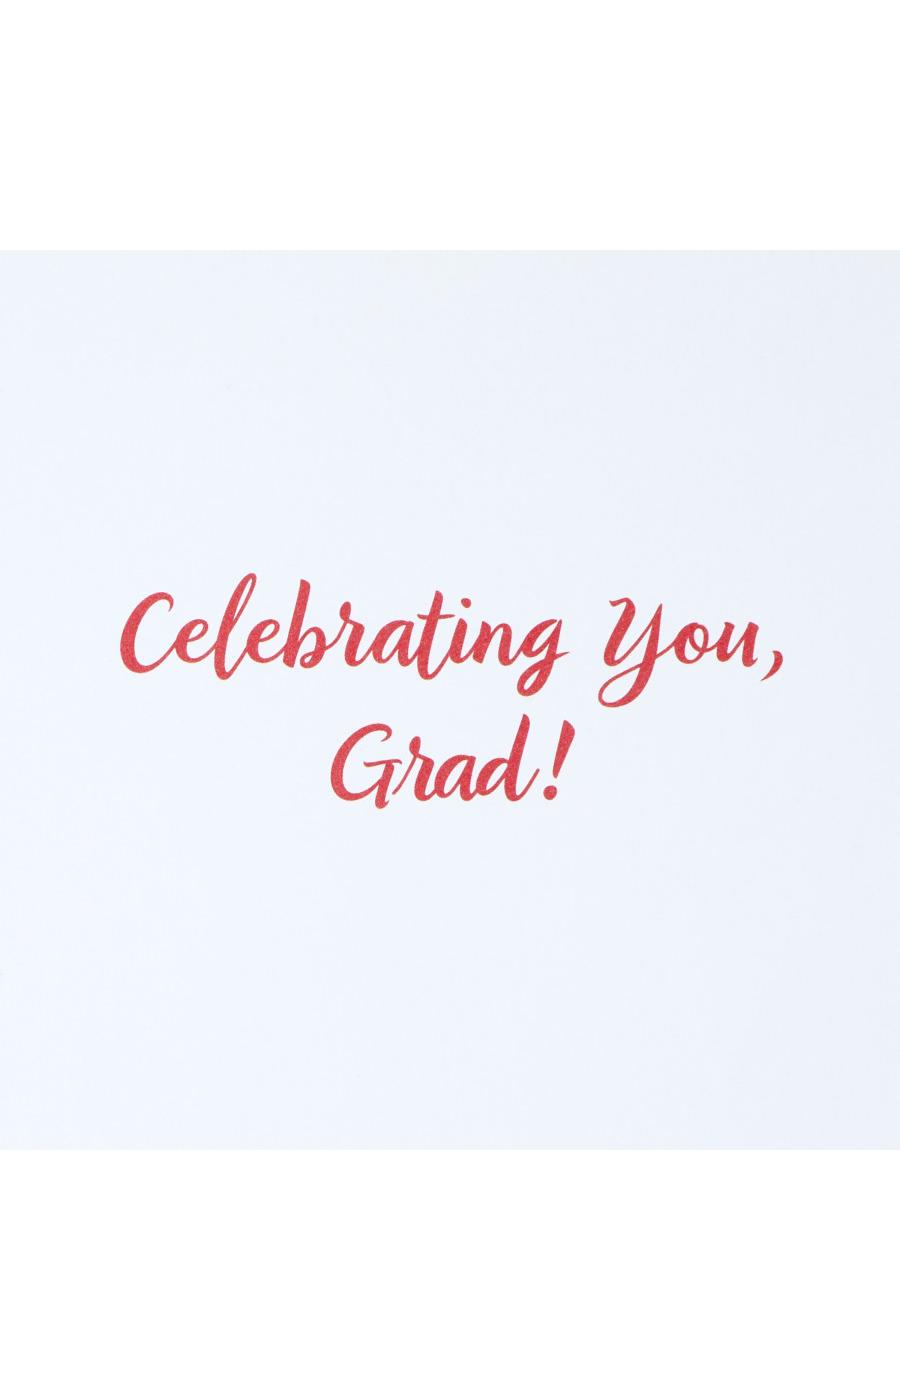 Hallmark Cap and Gown Graduation Card - S15, S8; image 6 of 6